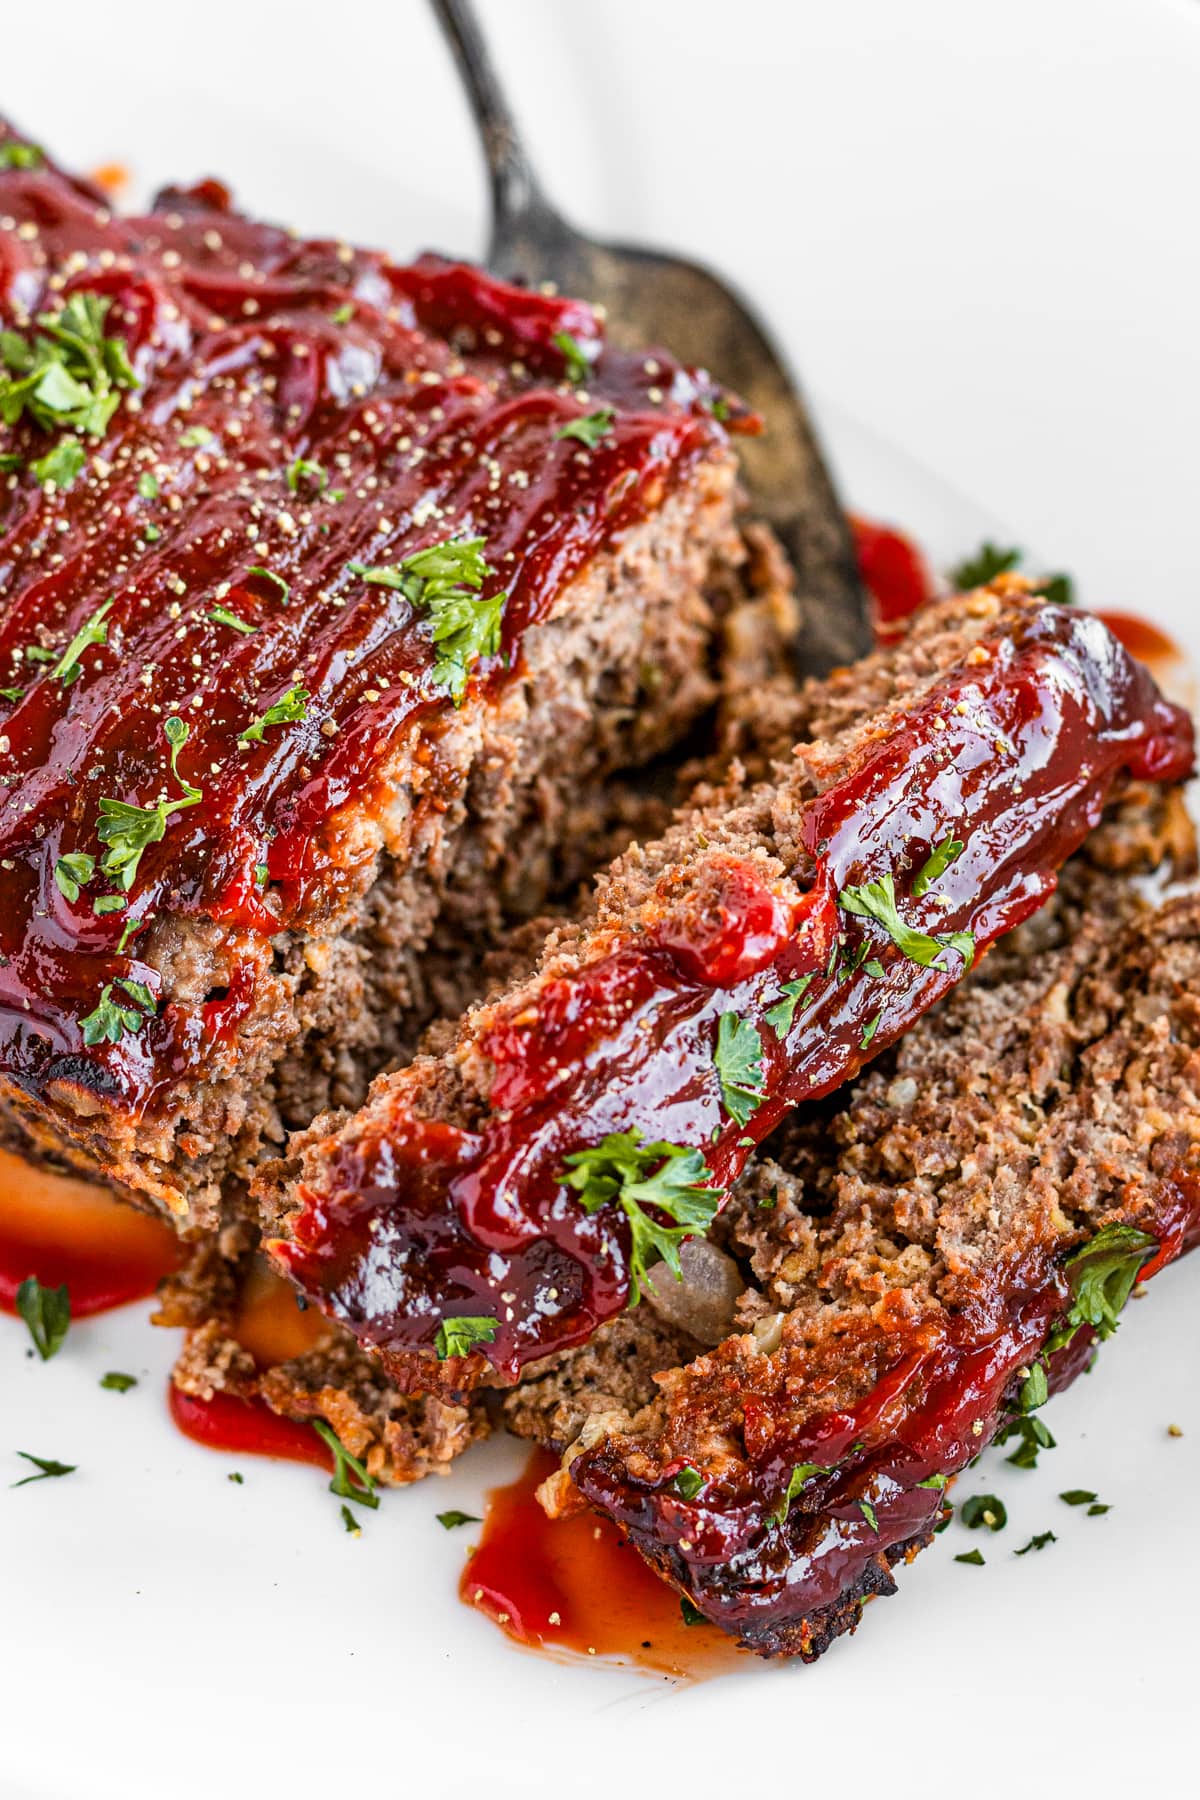 Meatloaf topped with red sauce and parsley, and sliced.